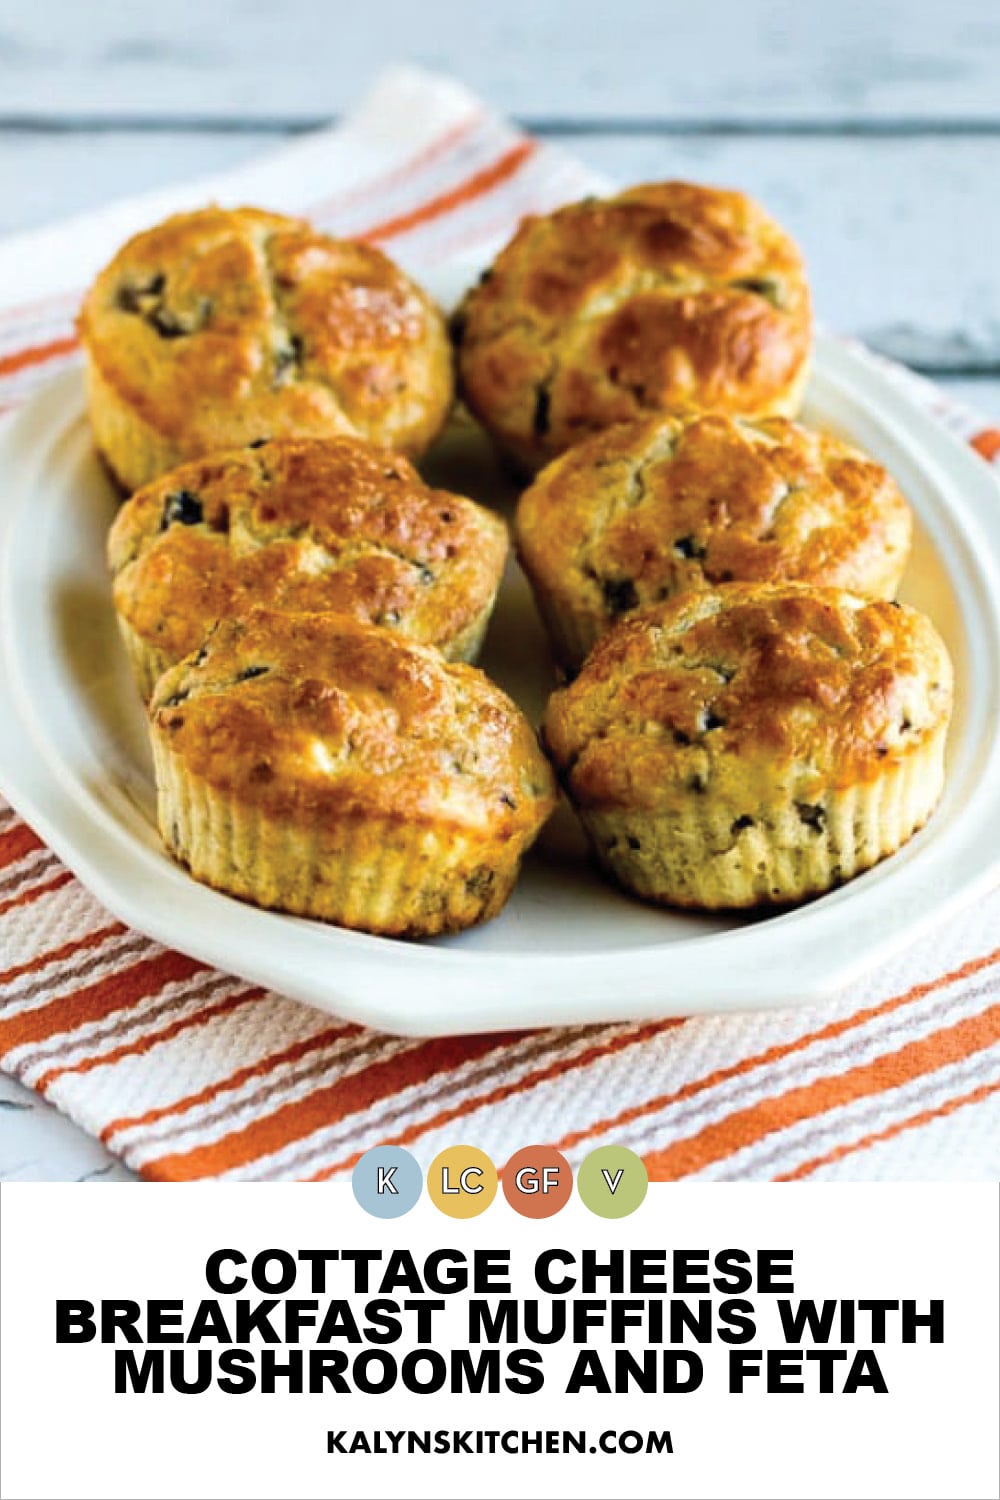 Pinterest image of Cottage Cheese Breakfast Muffins with Mushrooms and Feta